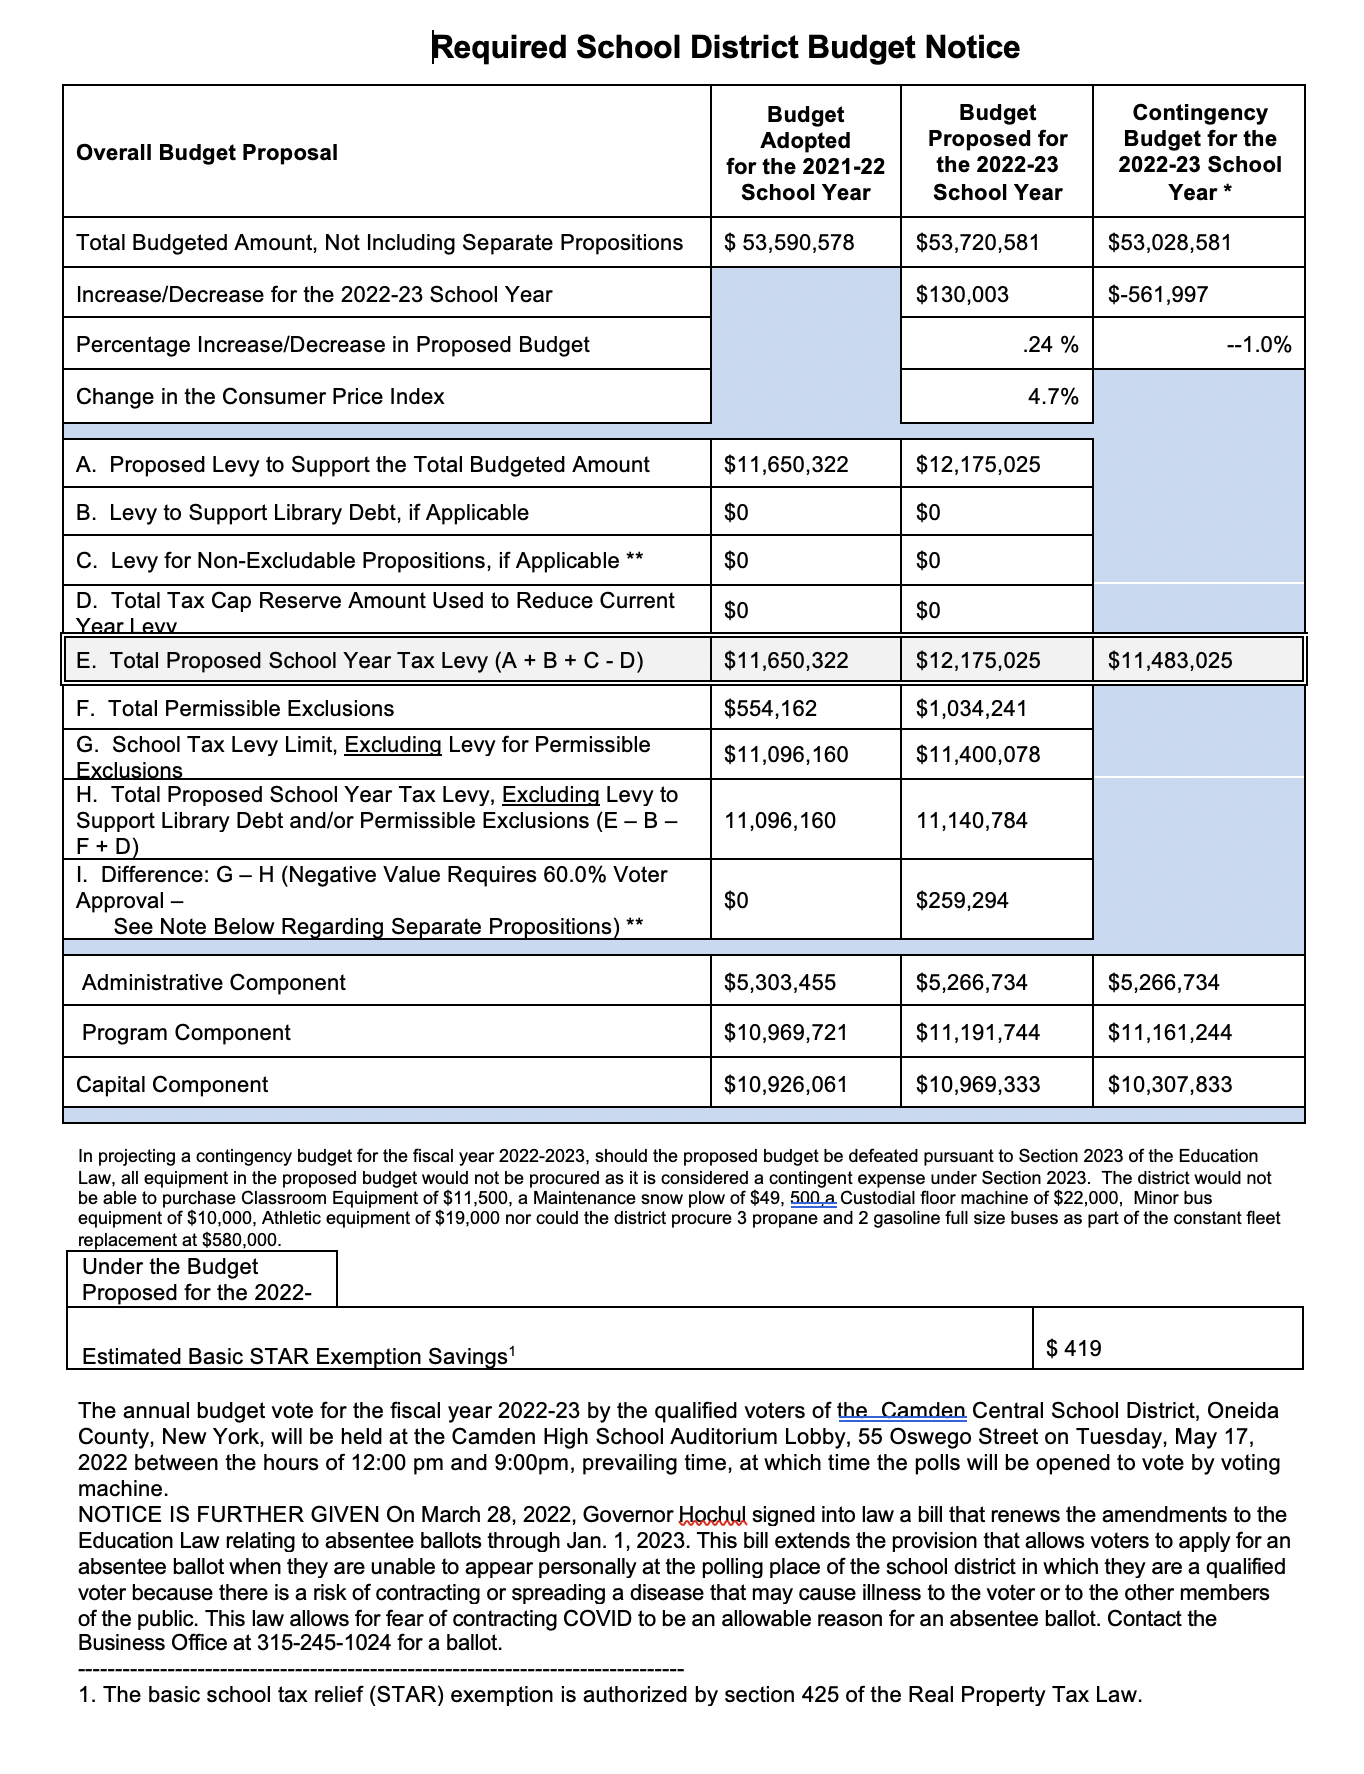 State Education Department Budget Notice